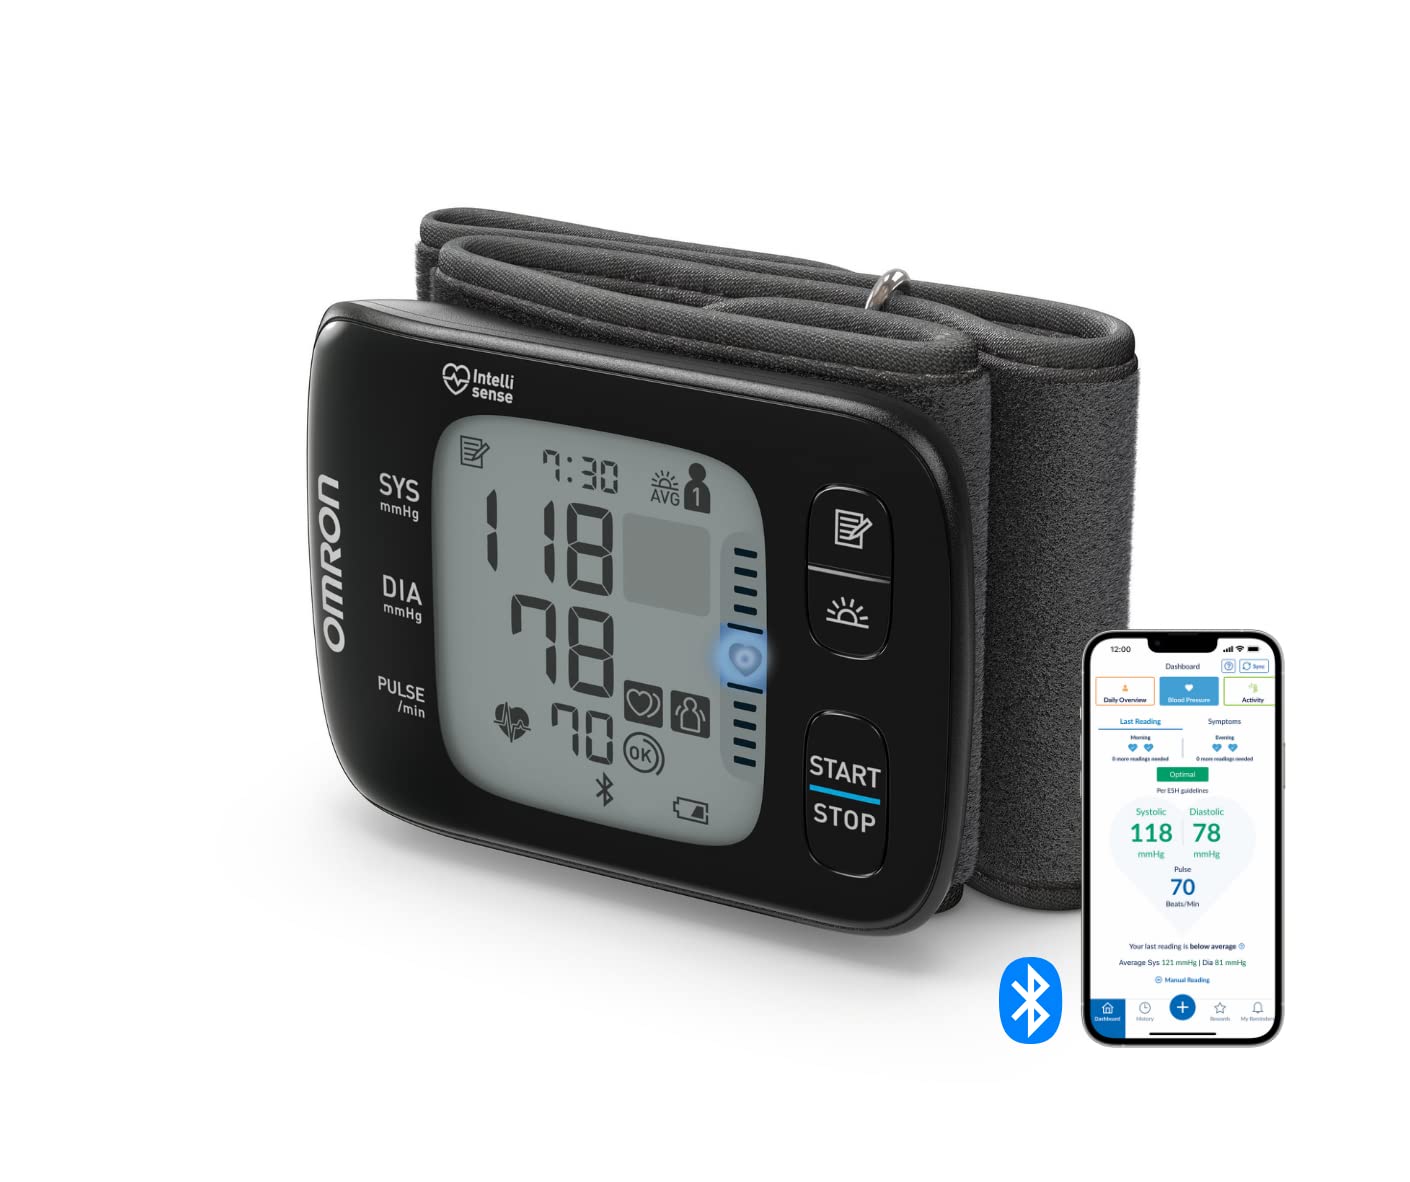 OMRON RS7 Automatic Wrist Blood Pressure Monitor for home use or on the go, clinically validated, including use on obese people, with free Smartphone App for iOS/Android and positioning sensor